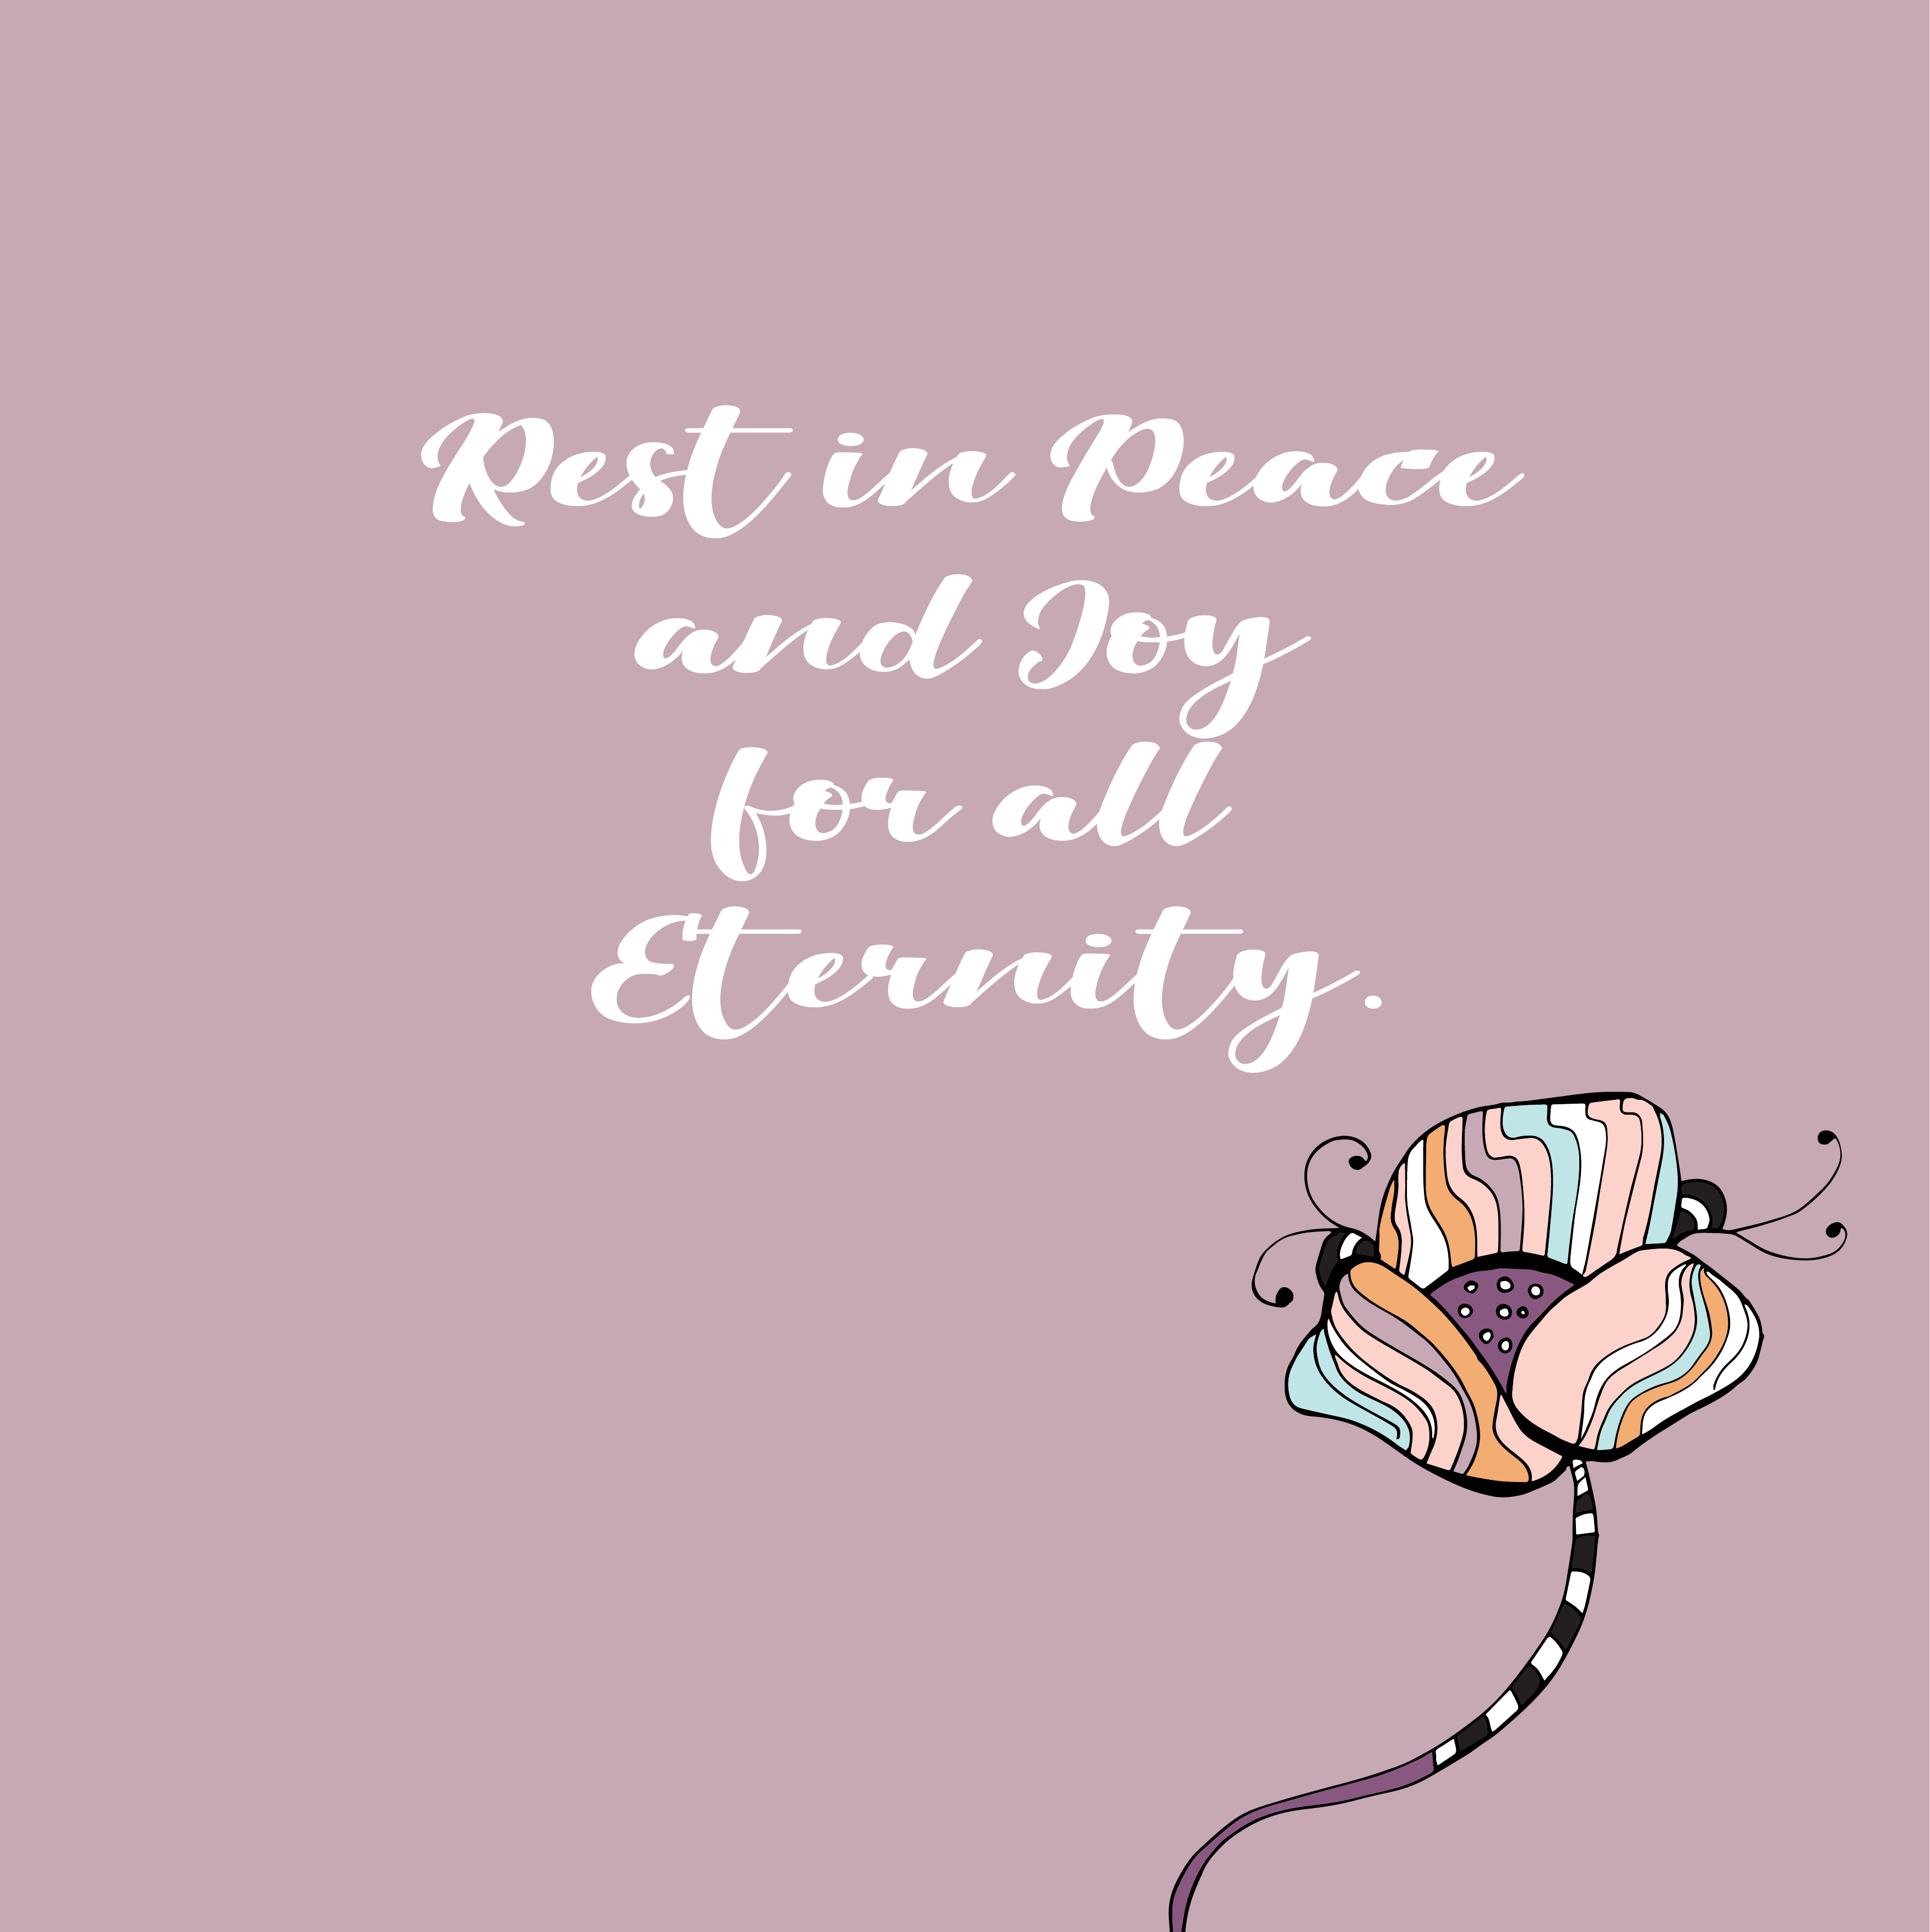 rest-in-peace-01